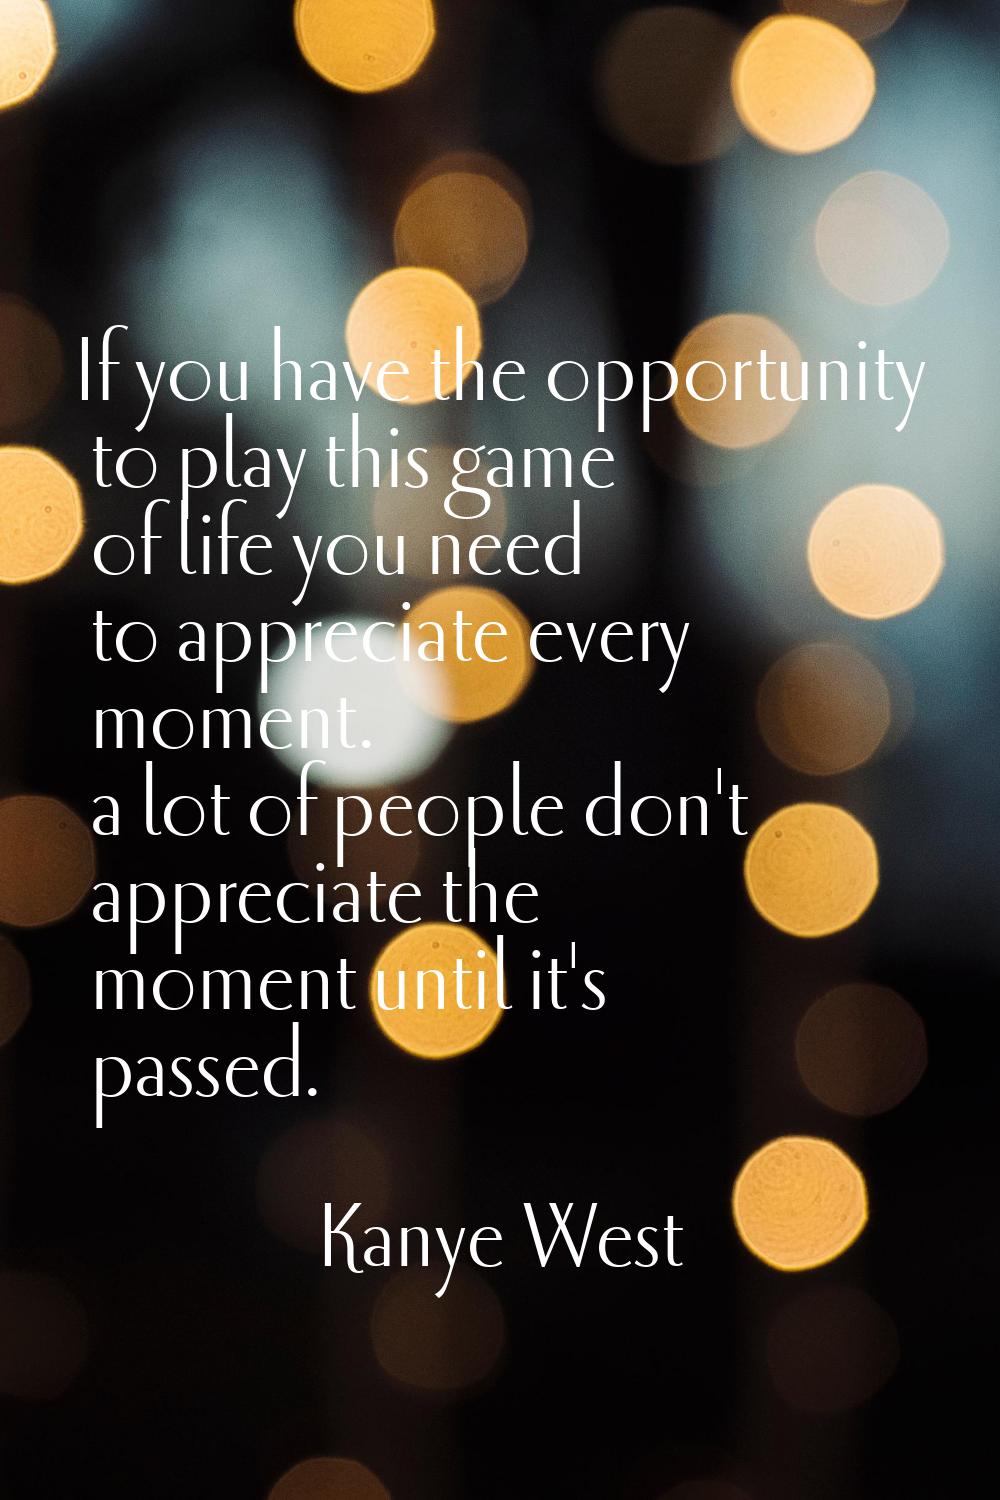 If you have the opportunity to play this game of life you need to appreciate every moment. a lot of